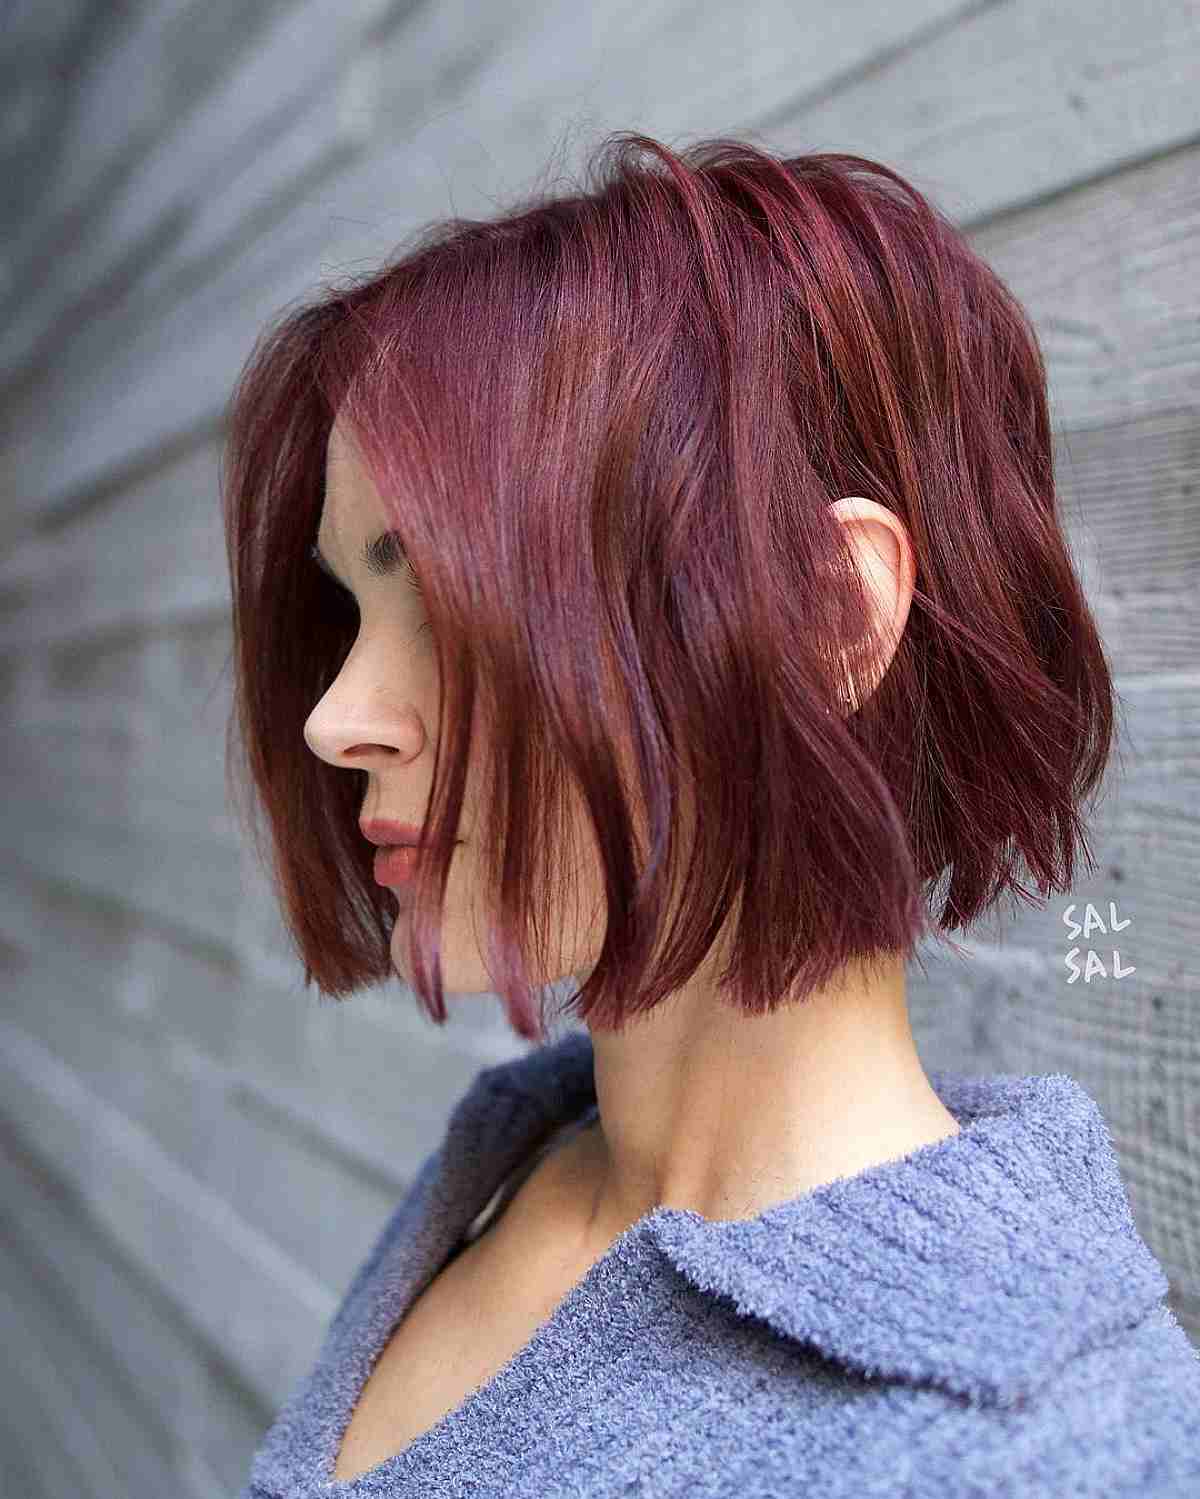 One-Length Maroon Bob Cut with Subtle Waves